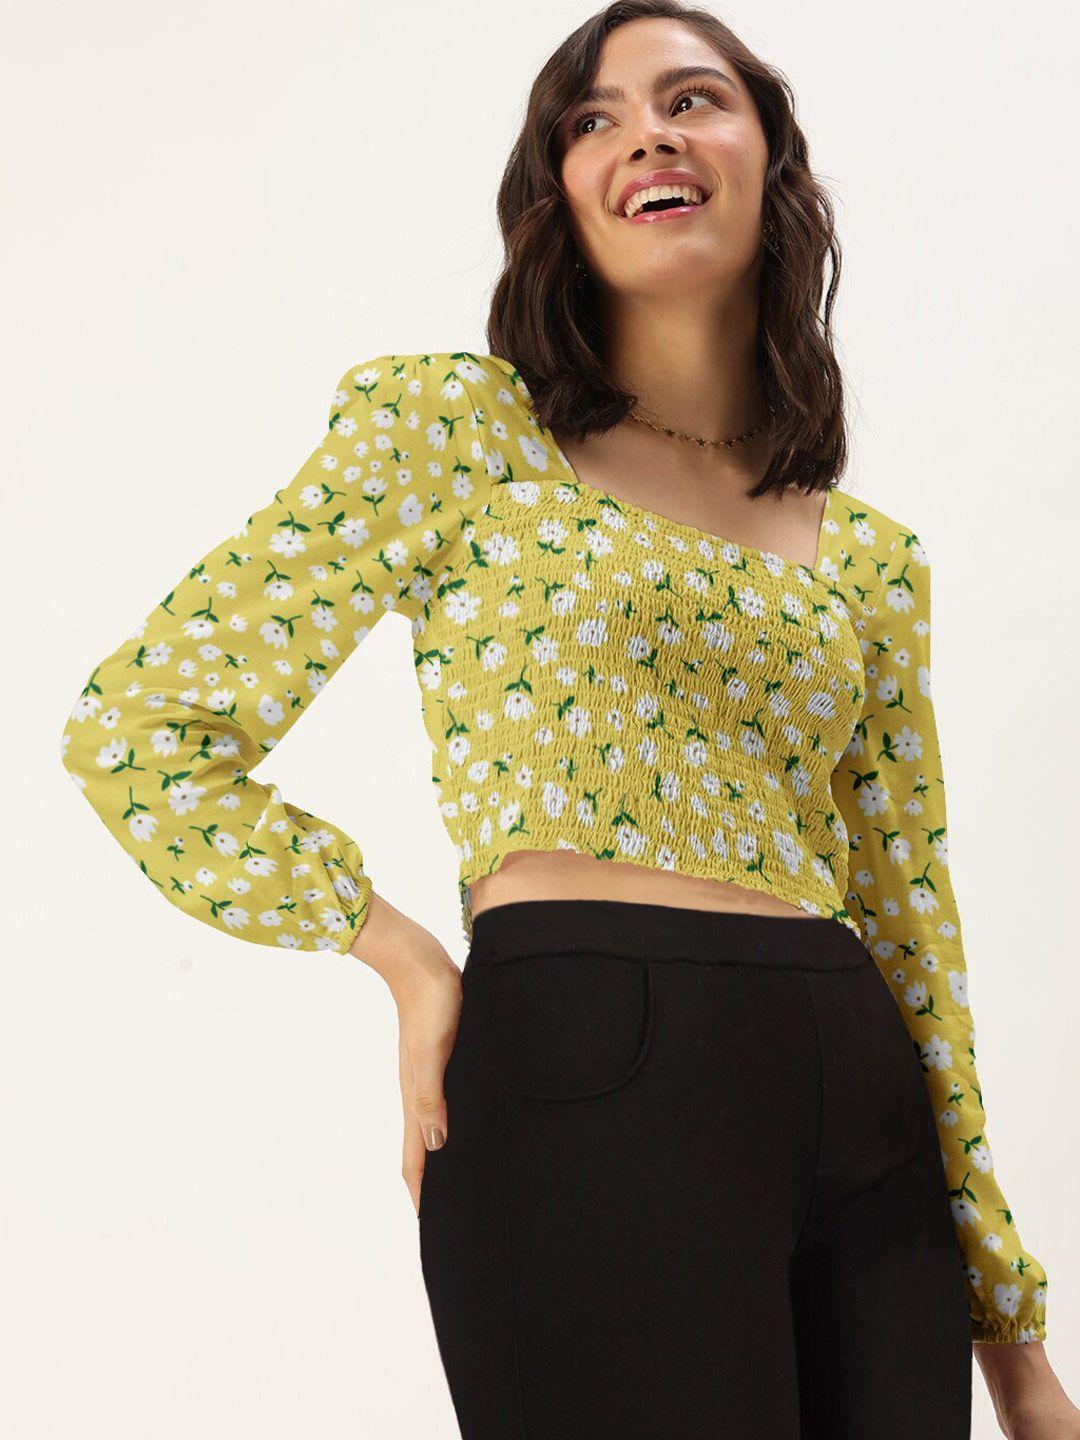 dressberry yellow floral printed smocked crop top